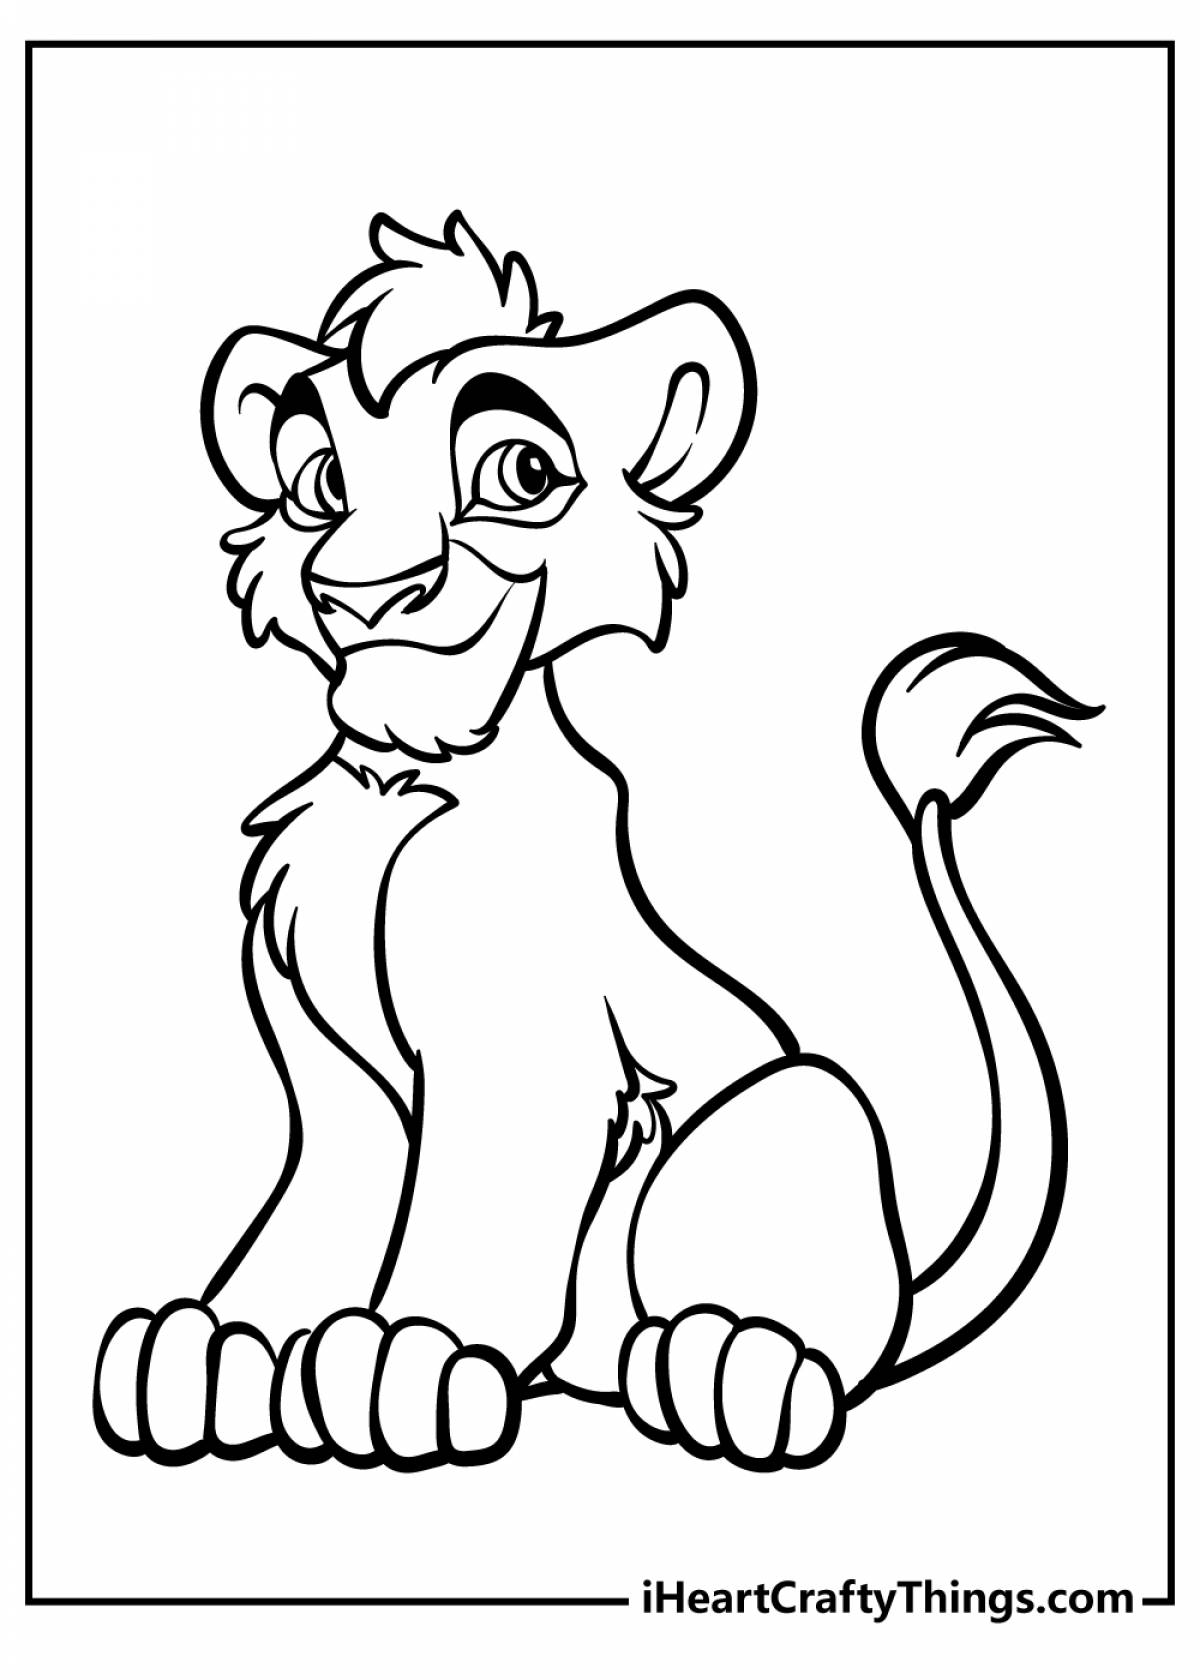 Animated lion coloring page for 3-4 year olds